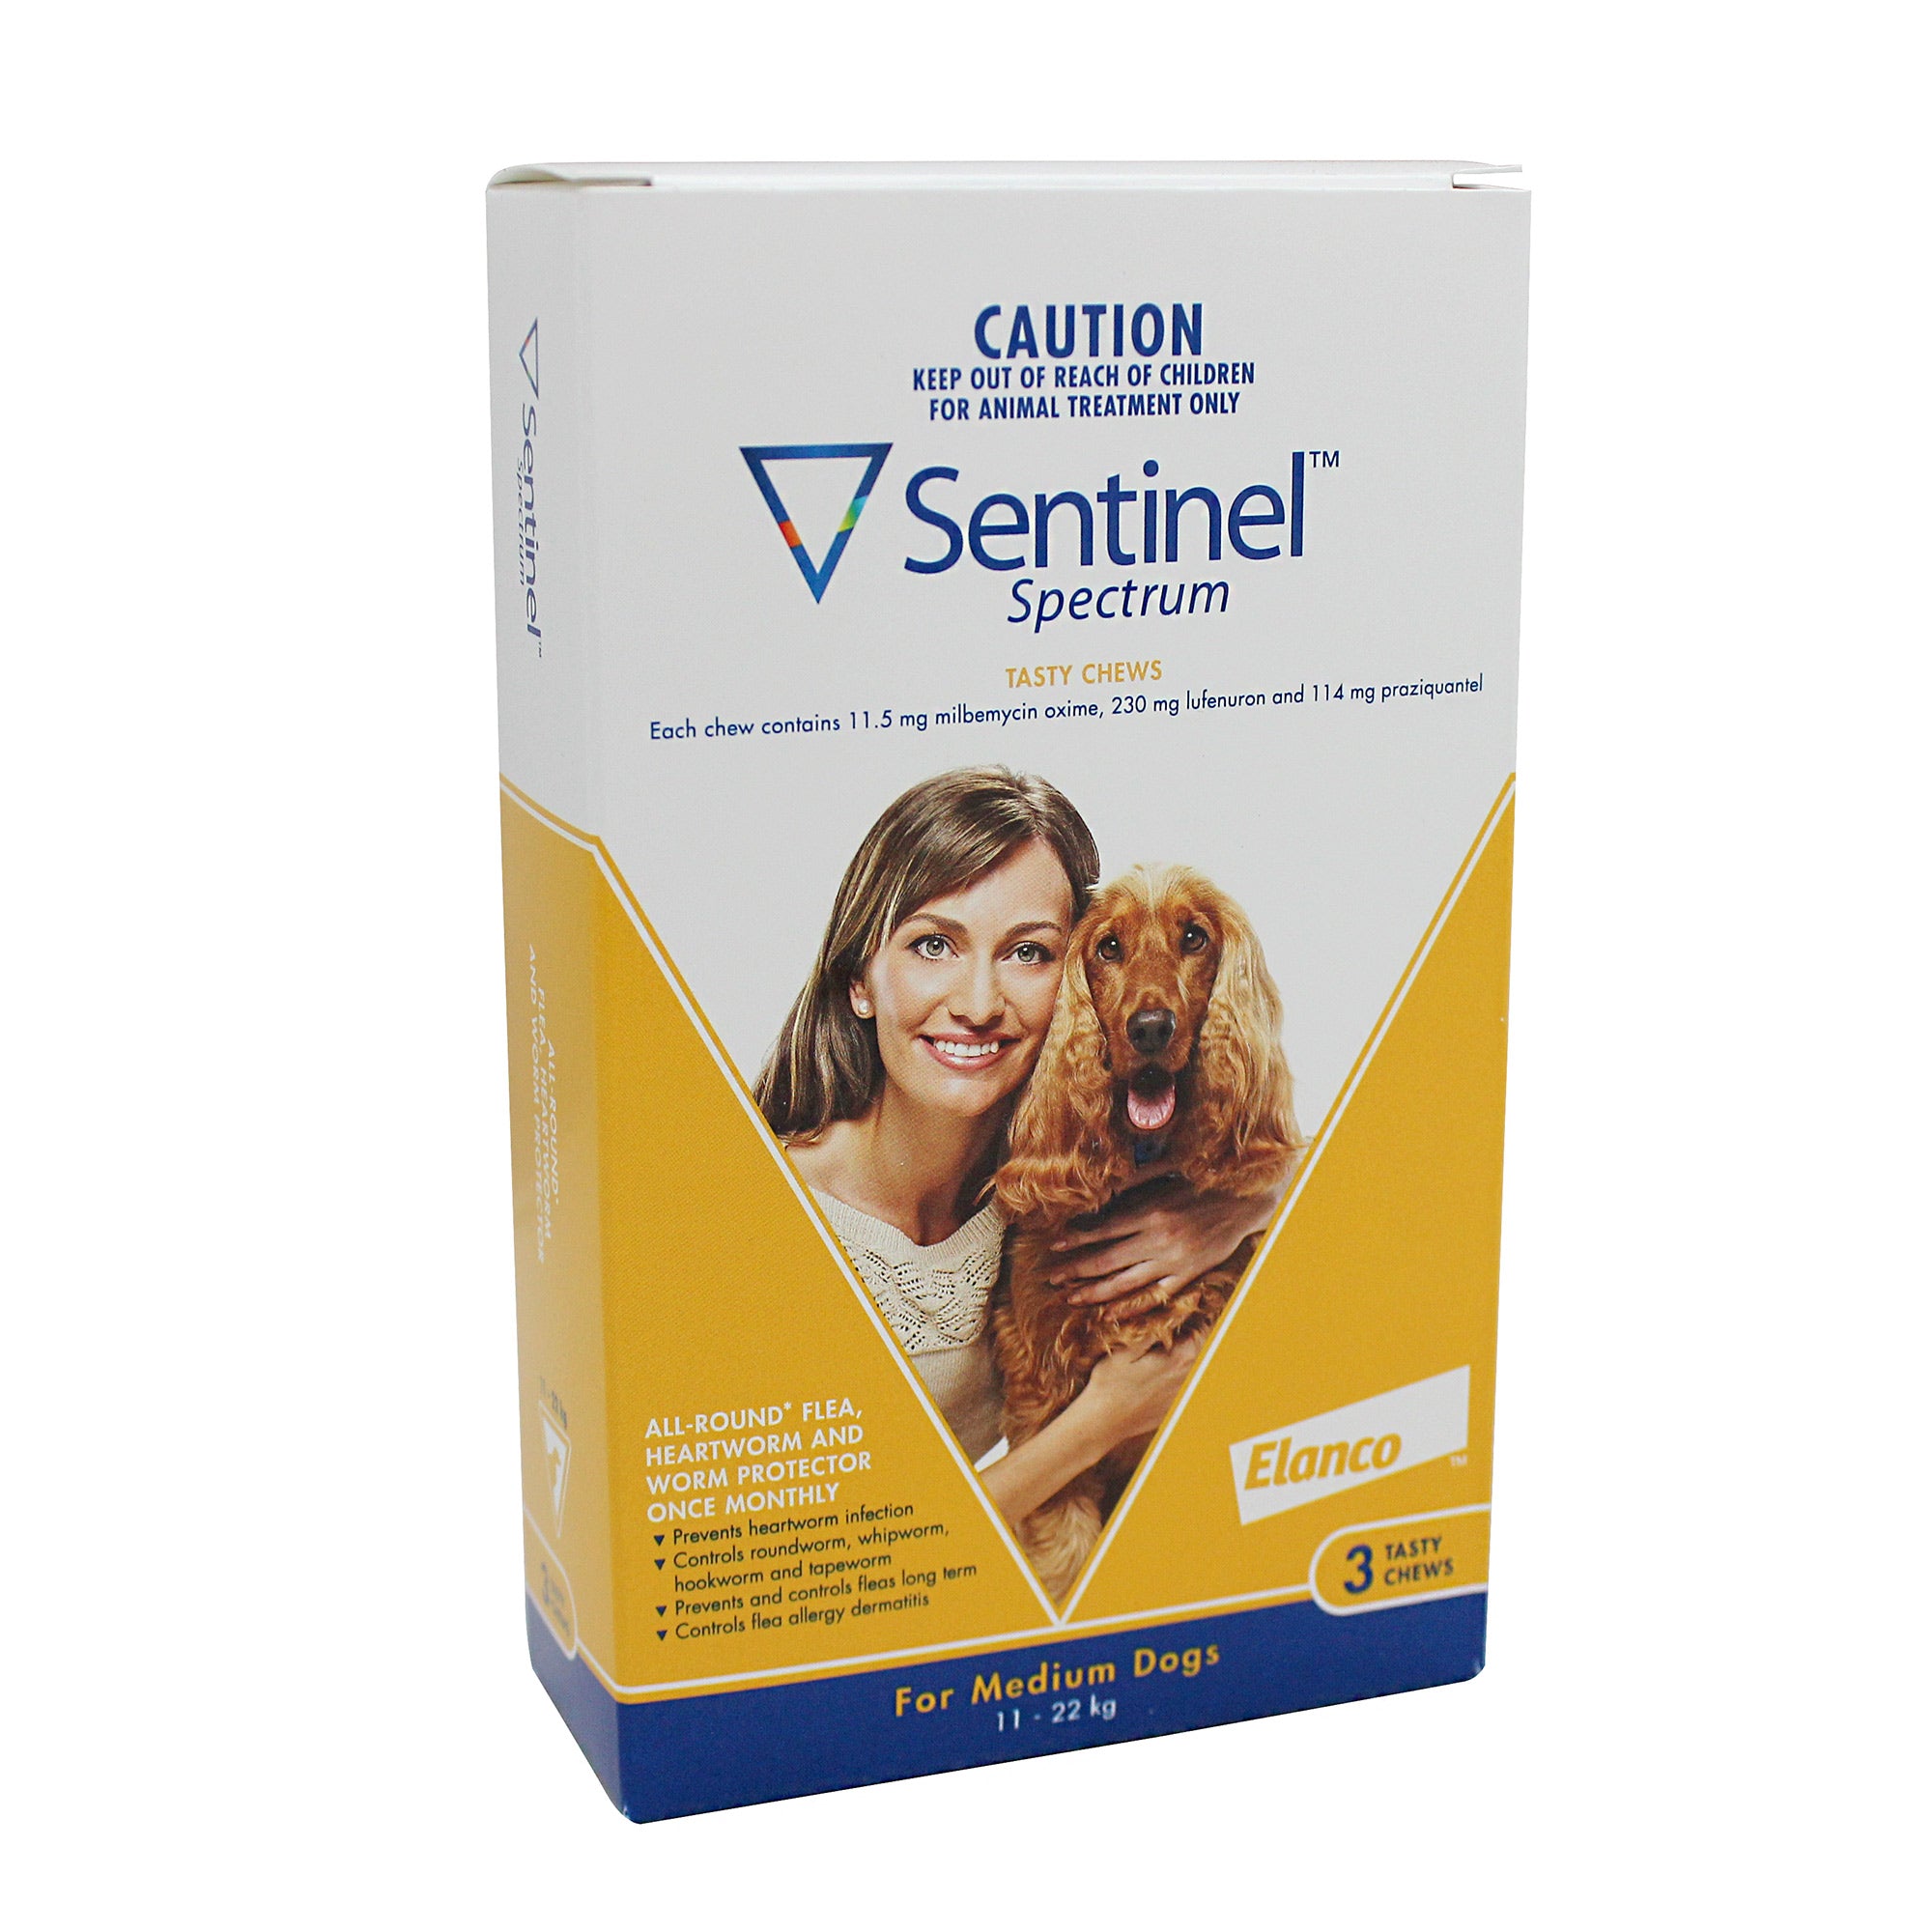 is sentinel spectrum safe for dogs